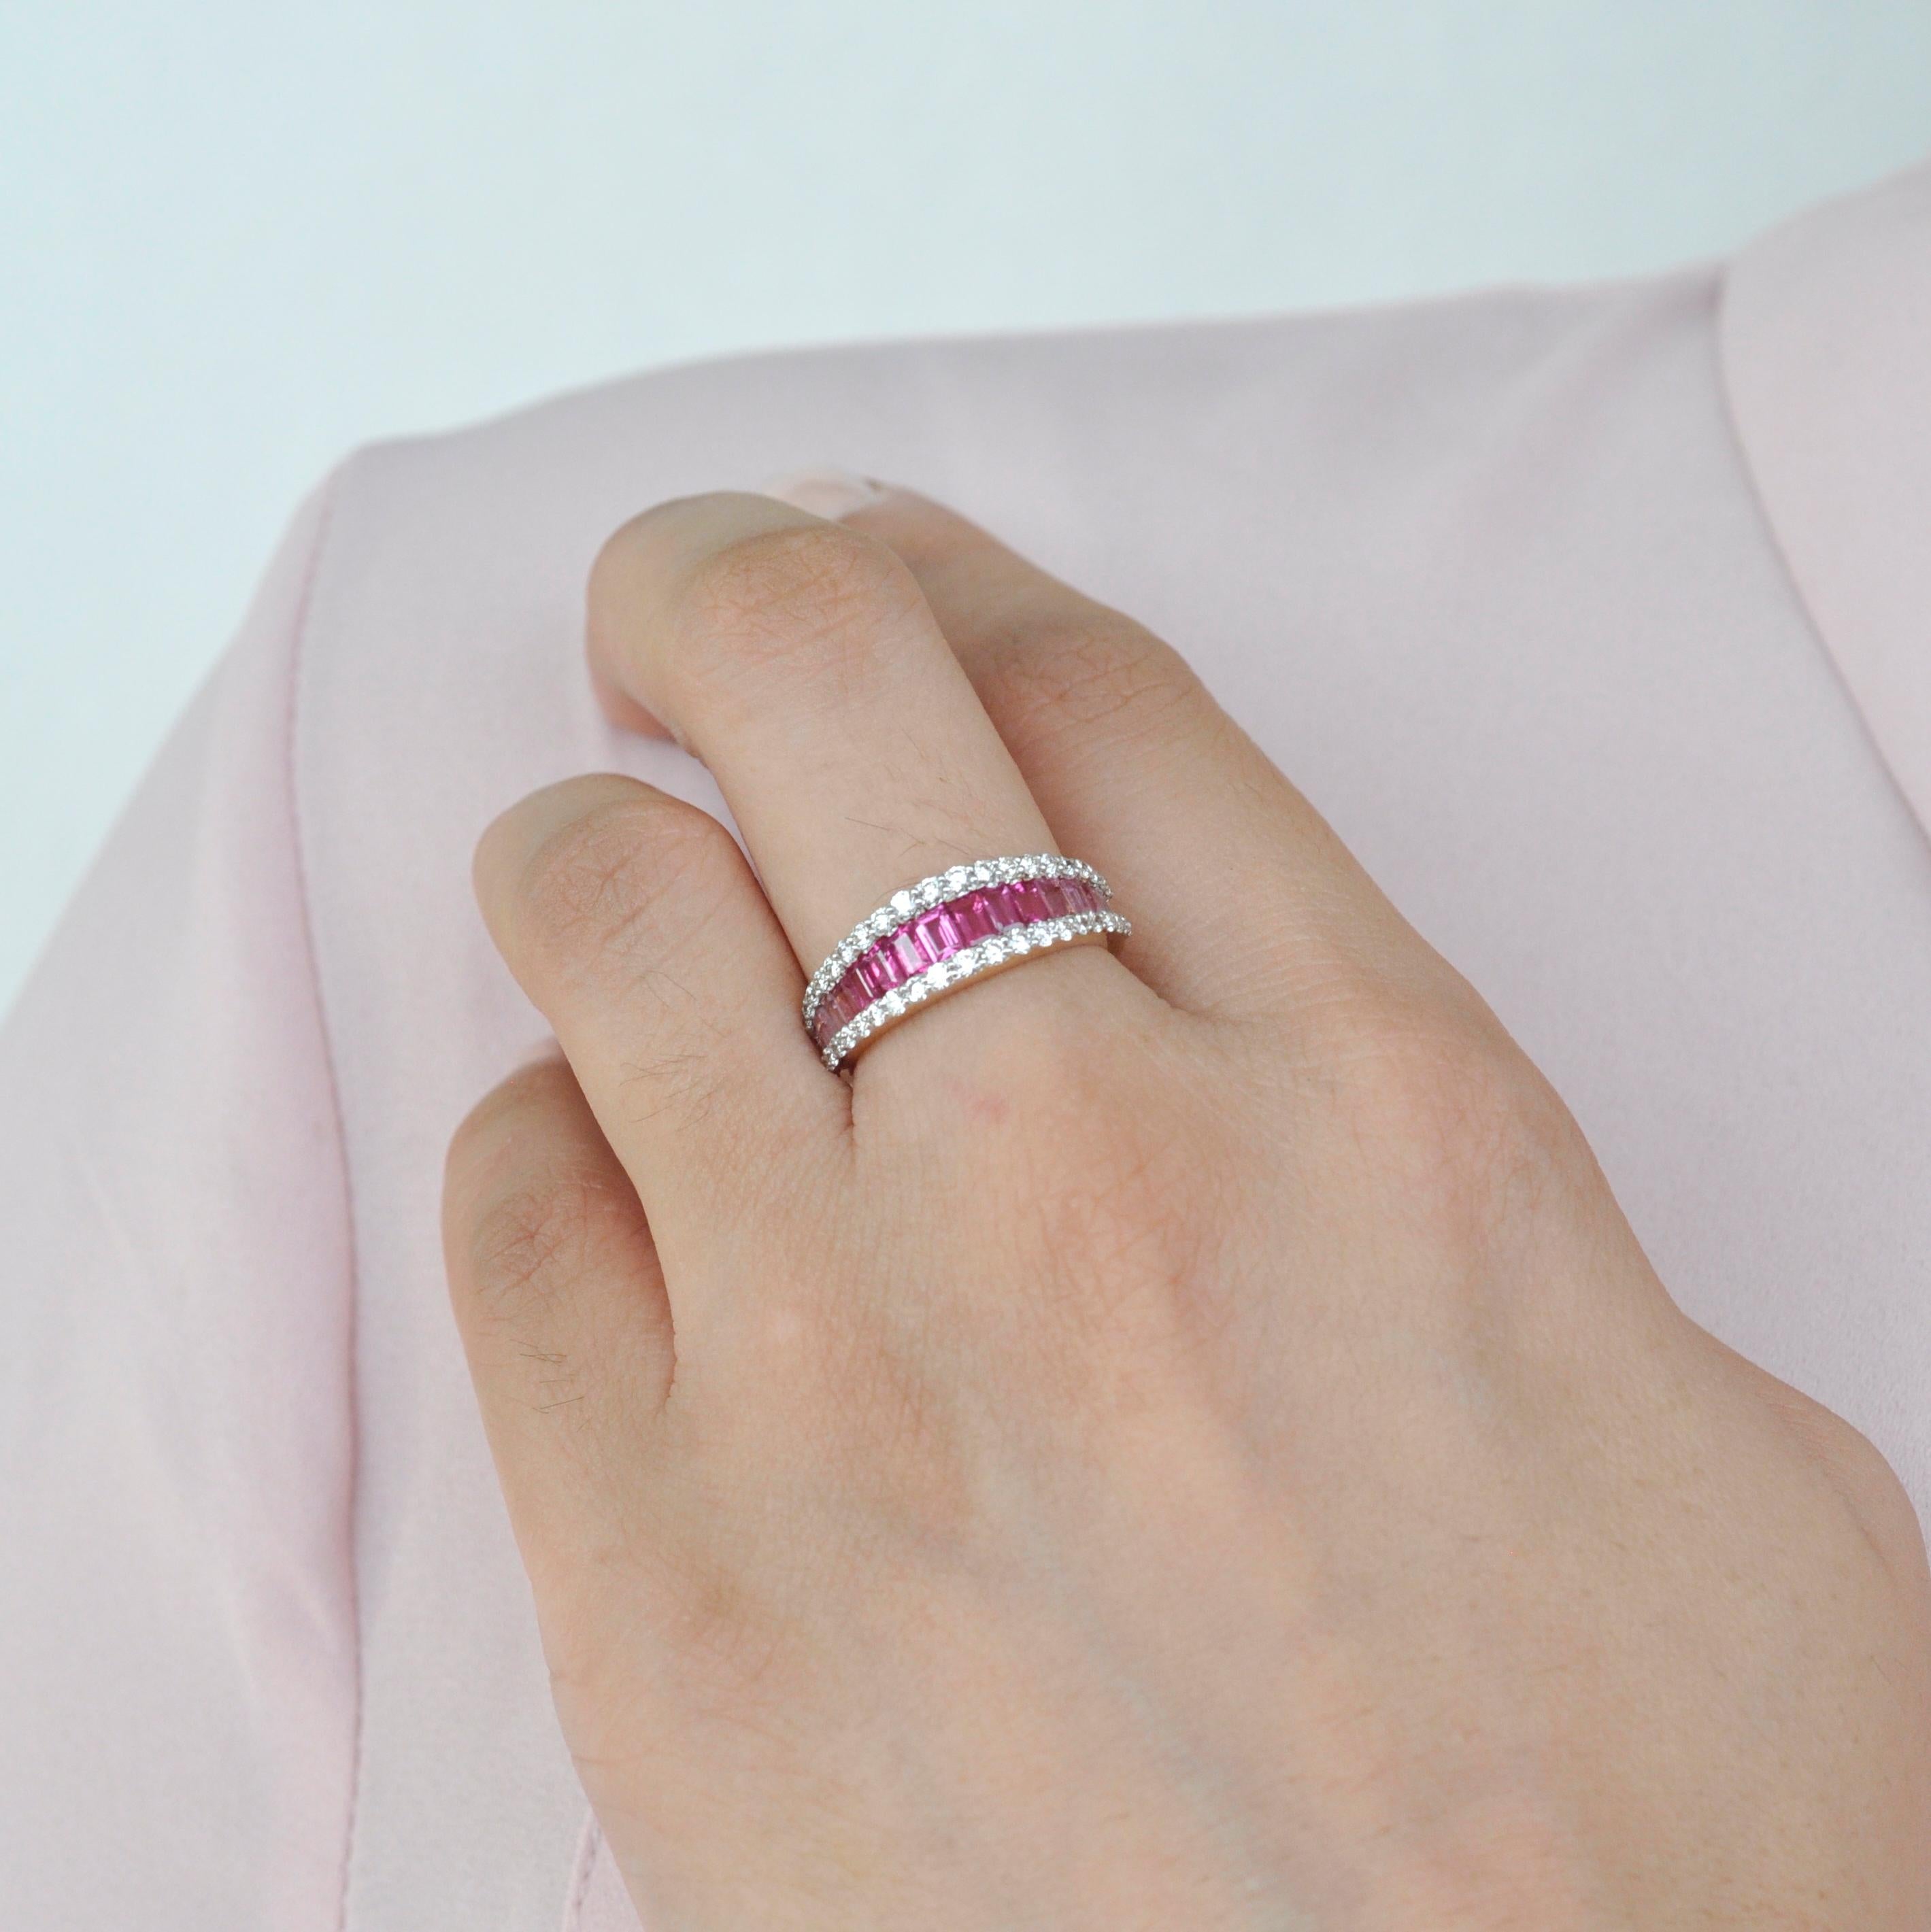 Art, color and culture all come together to inspire this delicate 18 karat gold pink tourmaline baguette diamond contemporary band ring, where dégradé hues of pink tourmaline exudes feminism while dictating the movement of eye. Meticulous